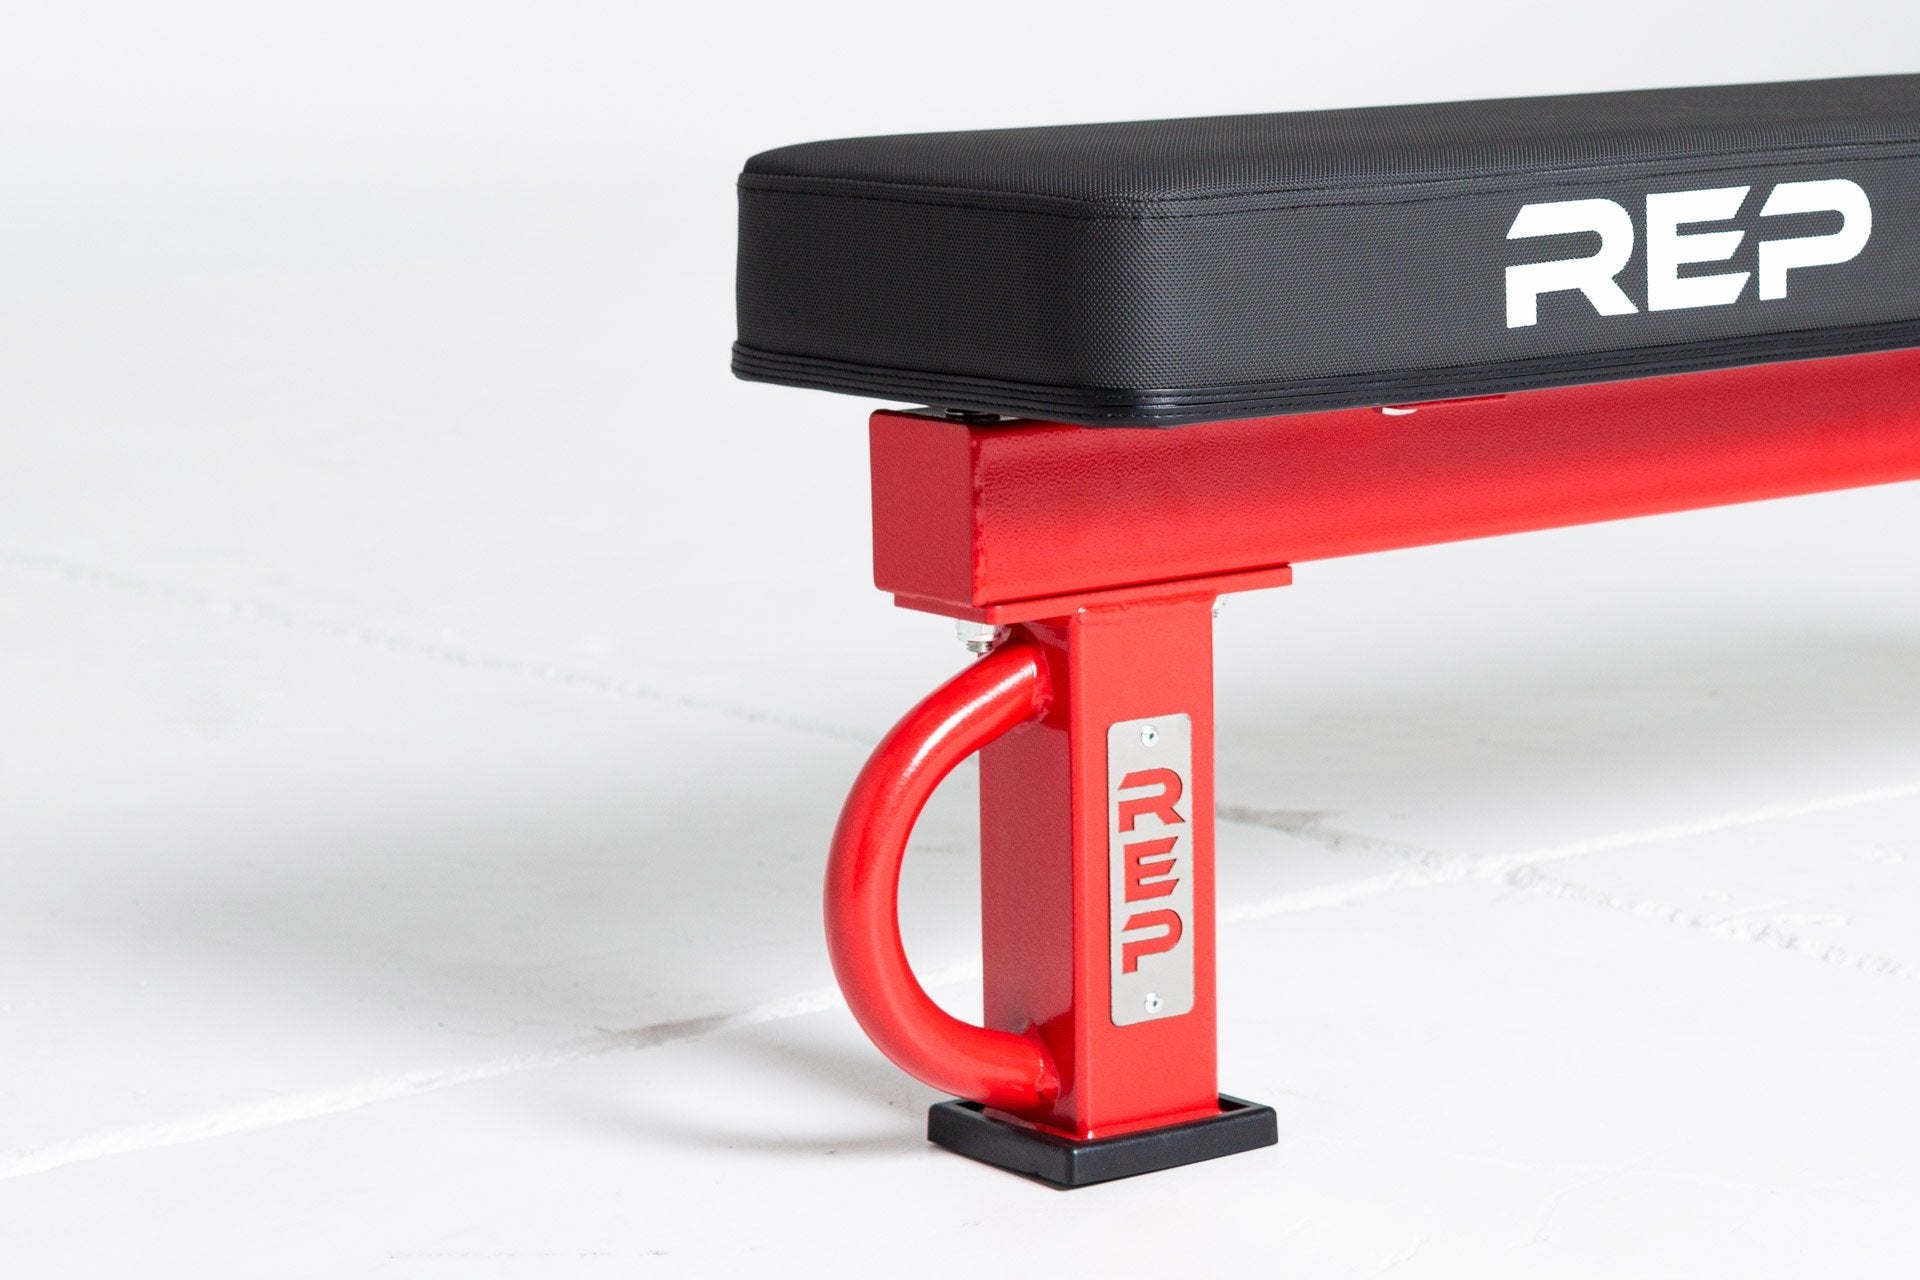 Handle on red FB-5000 bench